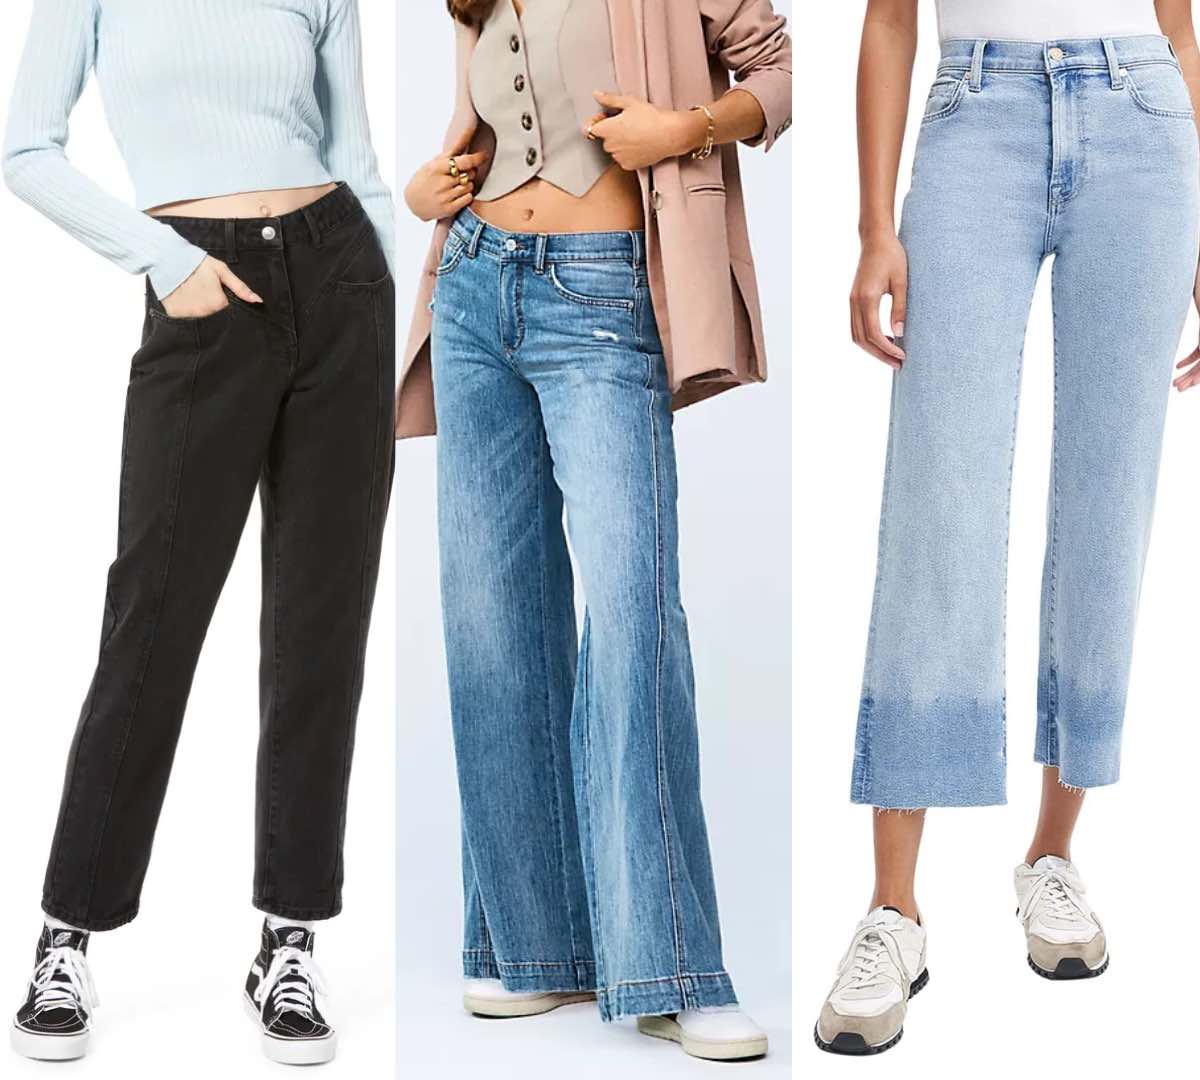 Wide Leg Jeans Outfit With Sneakers | vlr.eng.br